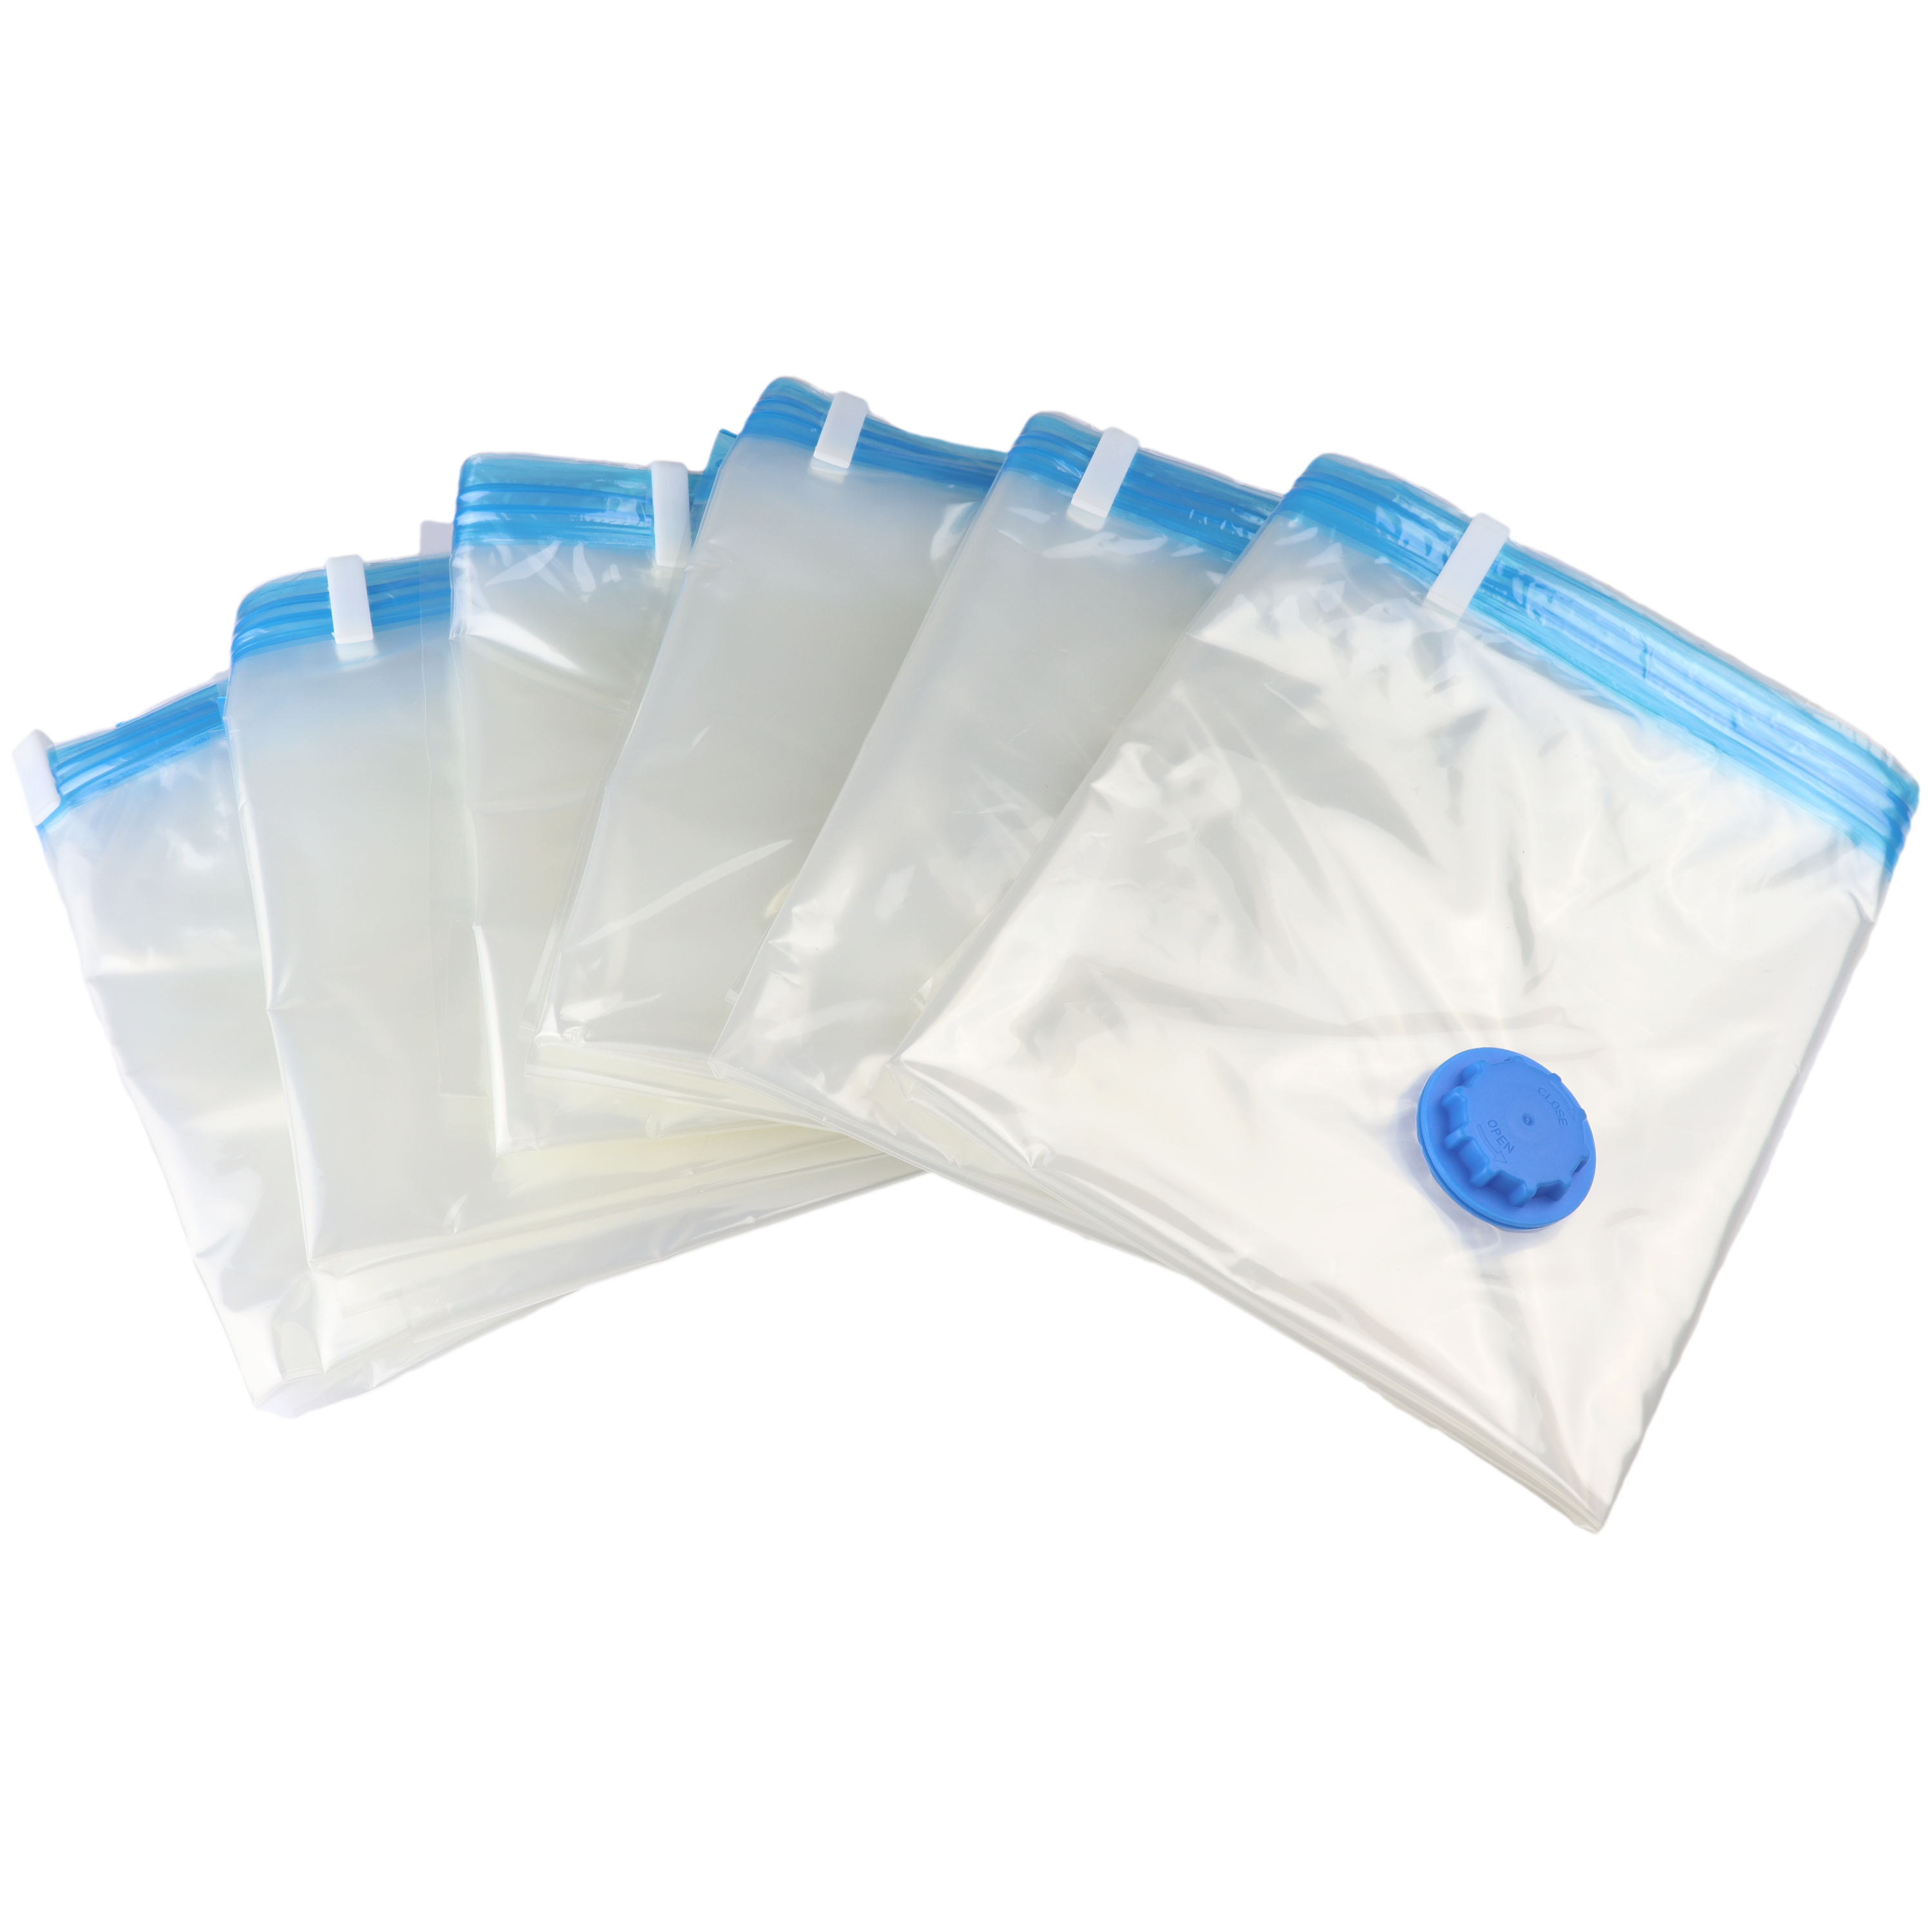 6 Large Vacuum Storage Bags (80 x 100cm) with Hand Pump